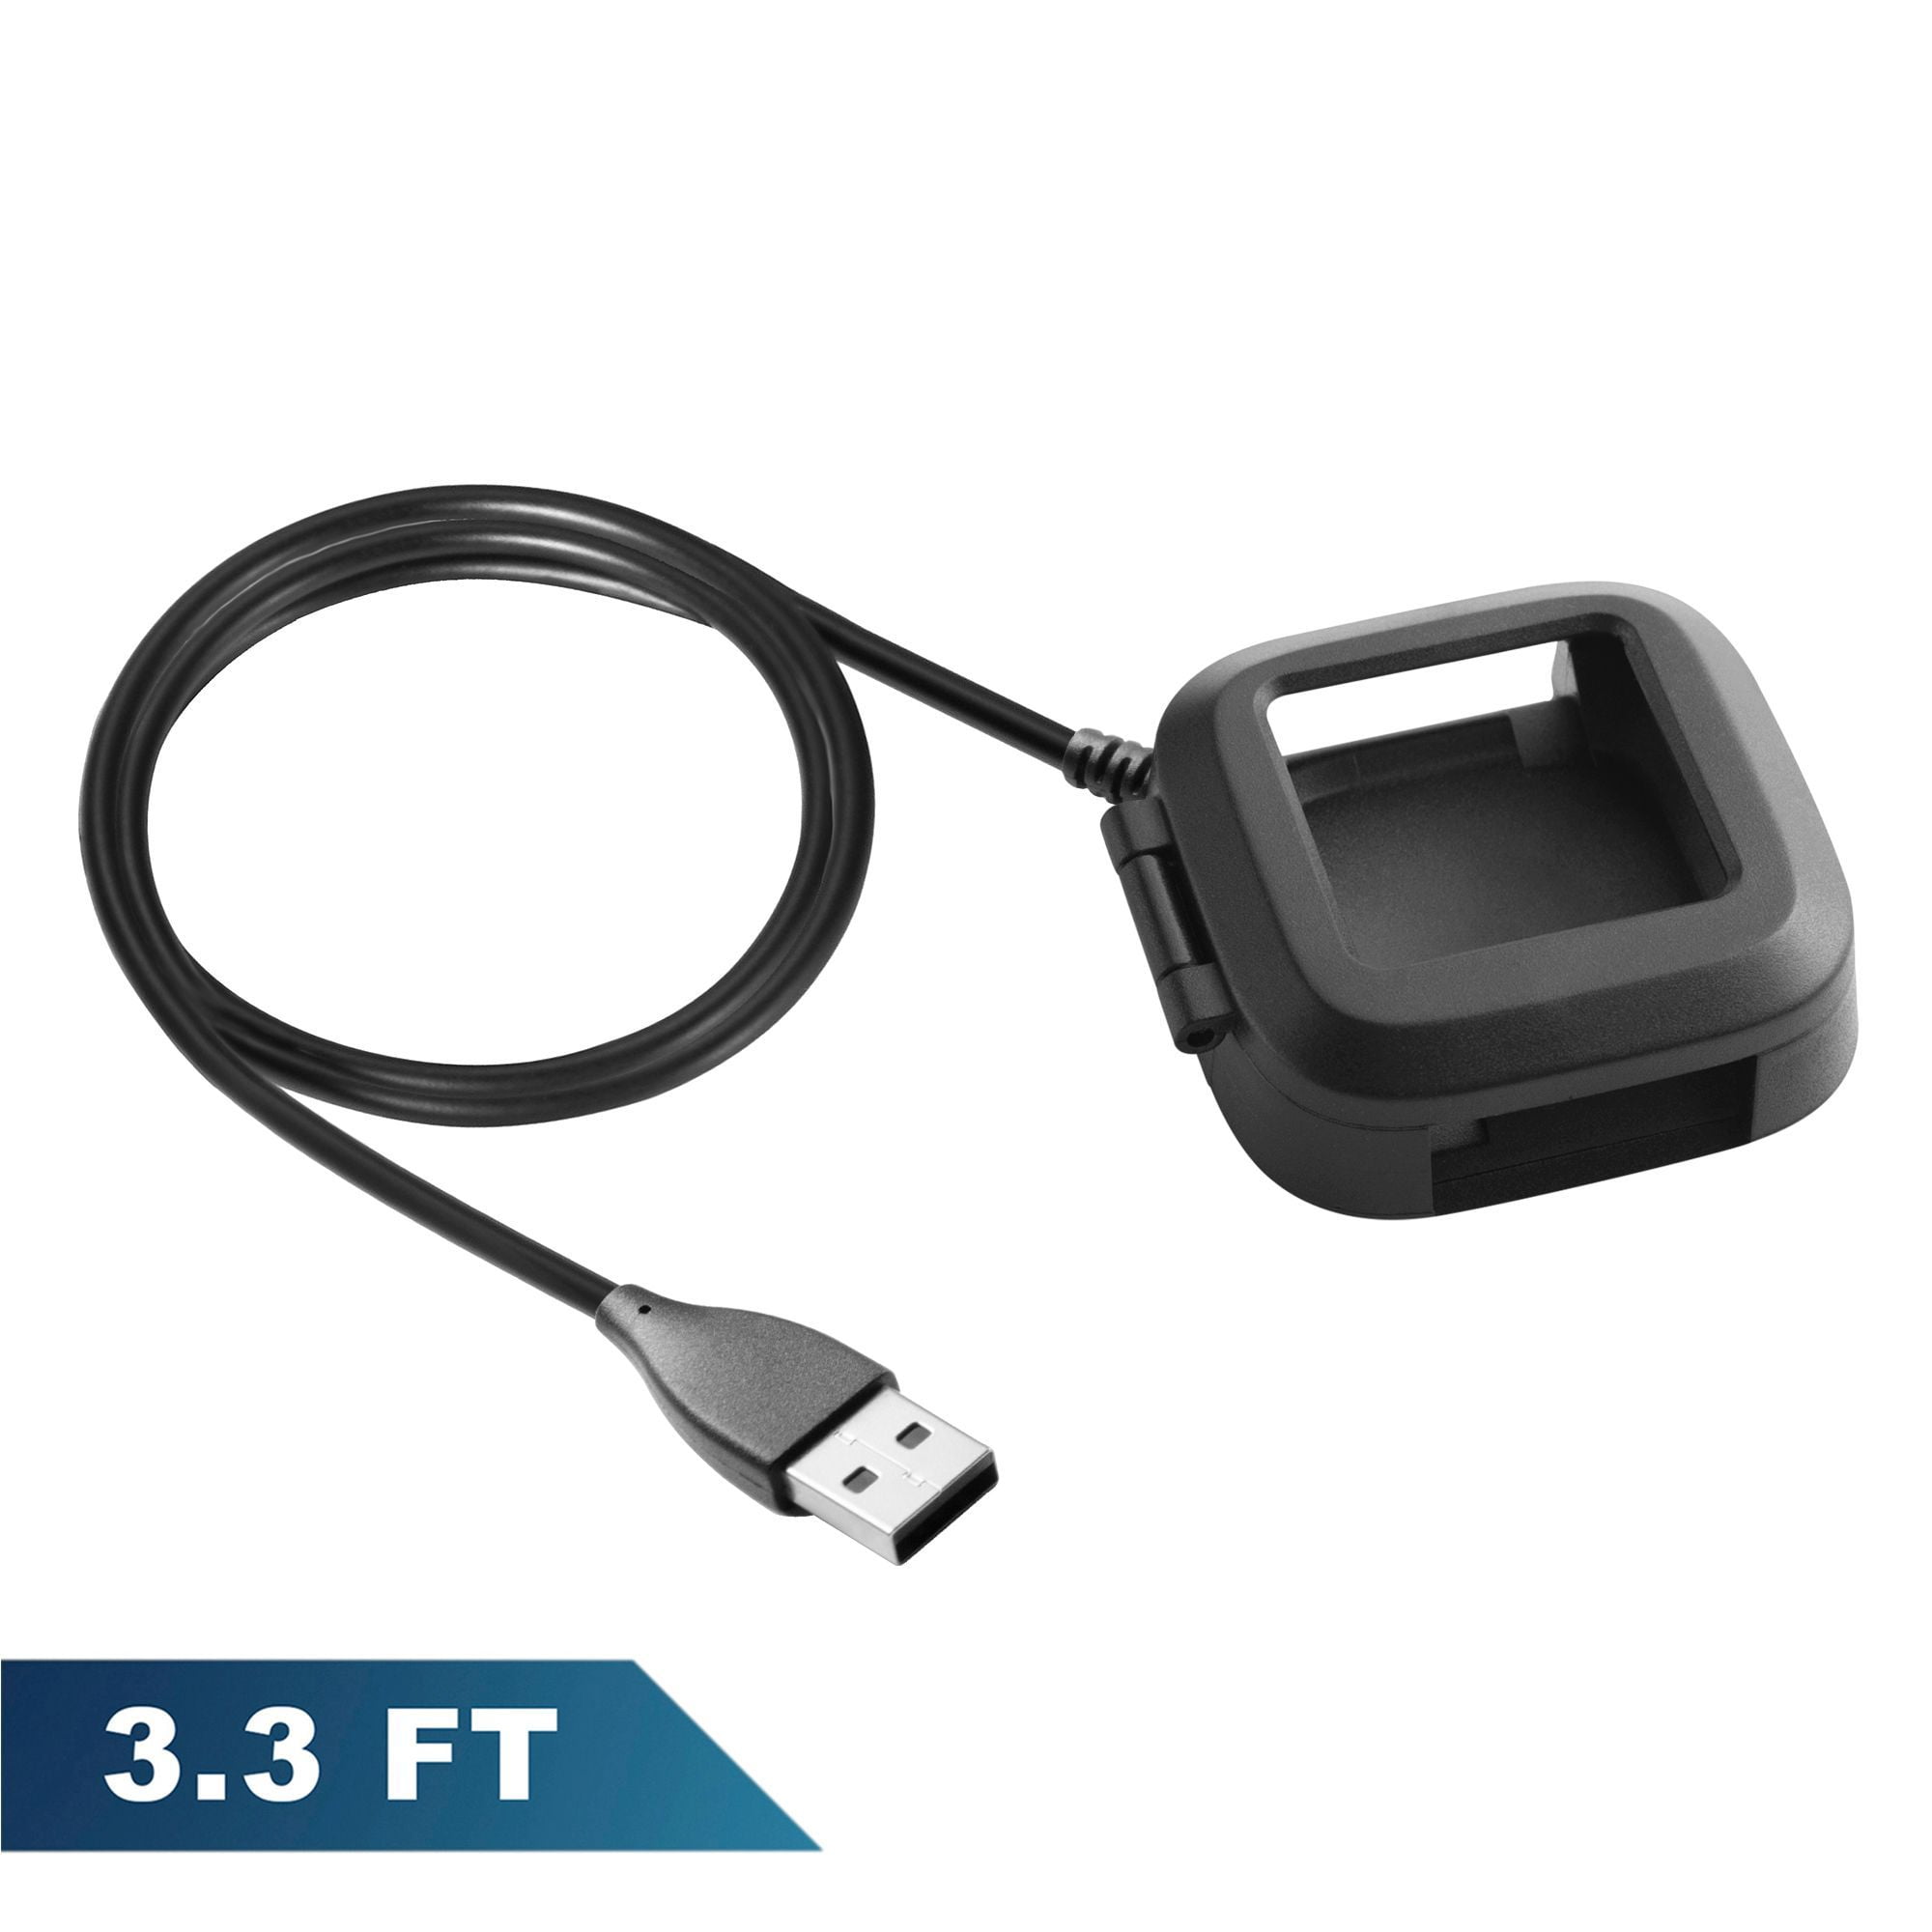 USB Charging Cable Power Charger Dock Cradle for Fitbit Versa Smart Watc T T EB 